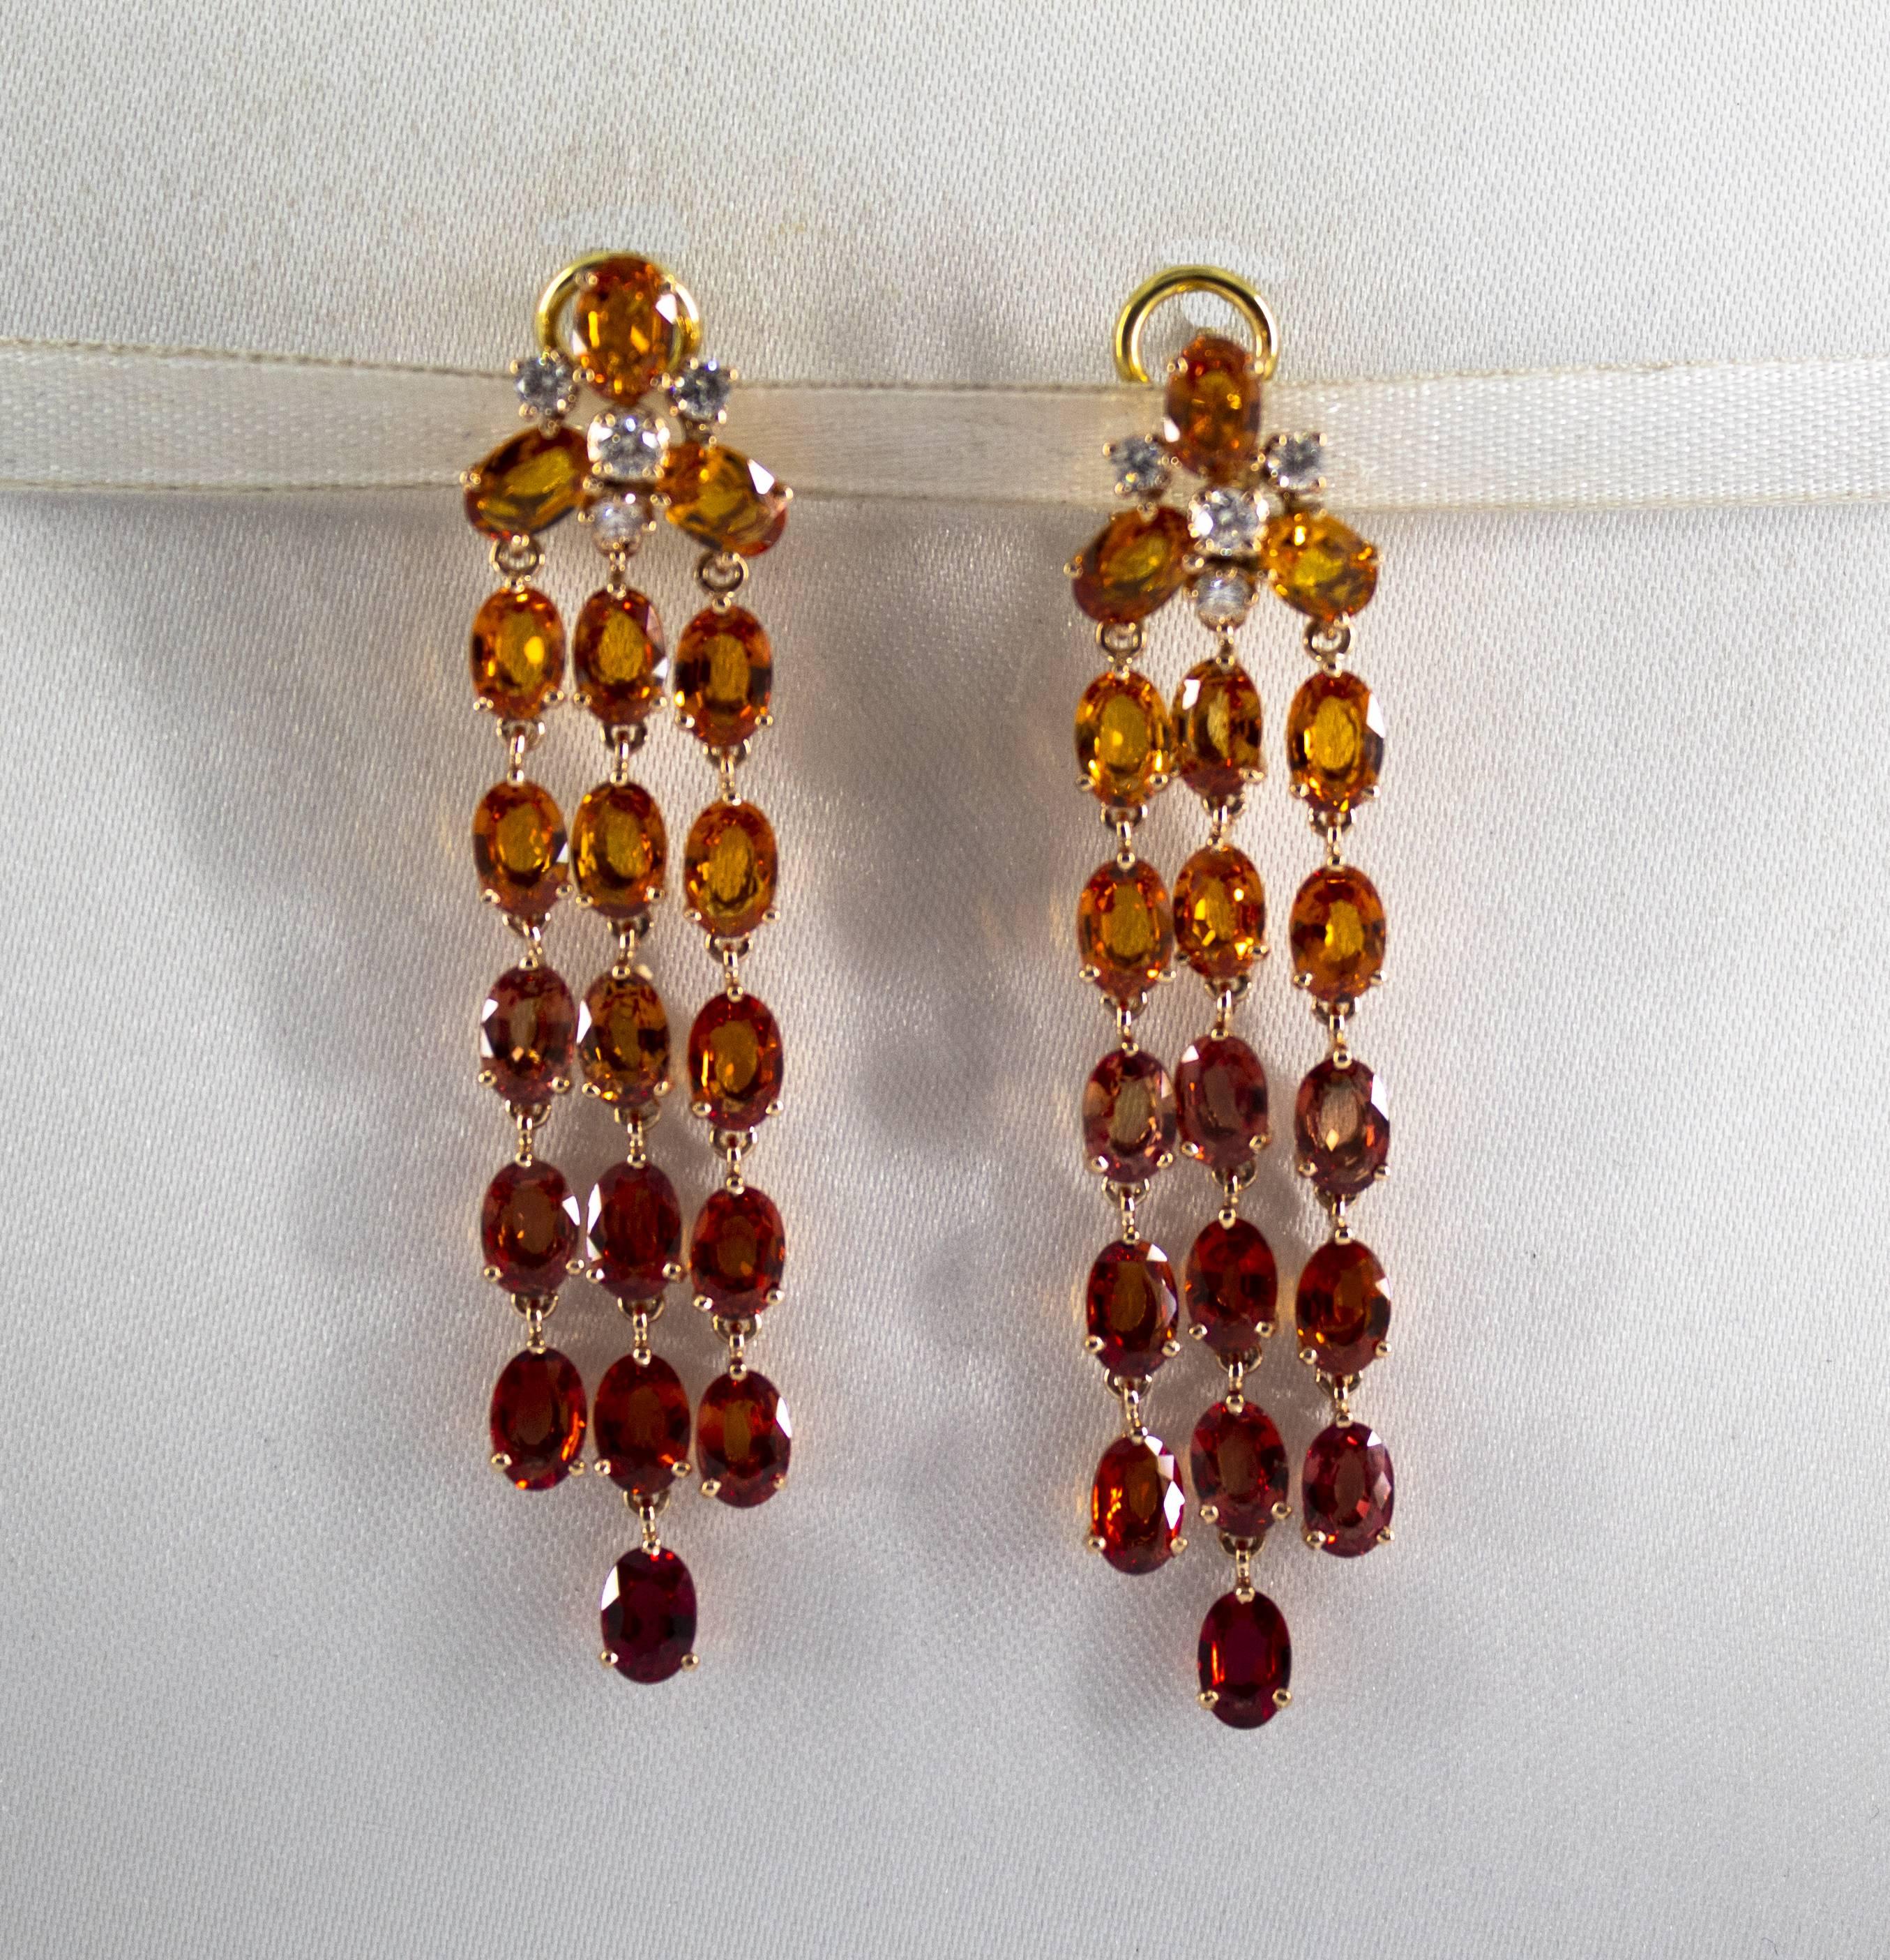 These Earrings are made of 14K Yellow Gold with 18K Yellow Gold Clips.
These Earrings have 0.45 Carats of Diamonds.
These Earrings have 21.30 Carats of Yellow Sapphires.
All our Earrings have pins for pierced ears but we can change the closure and